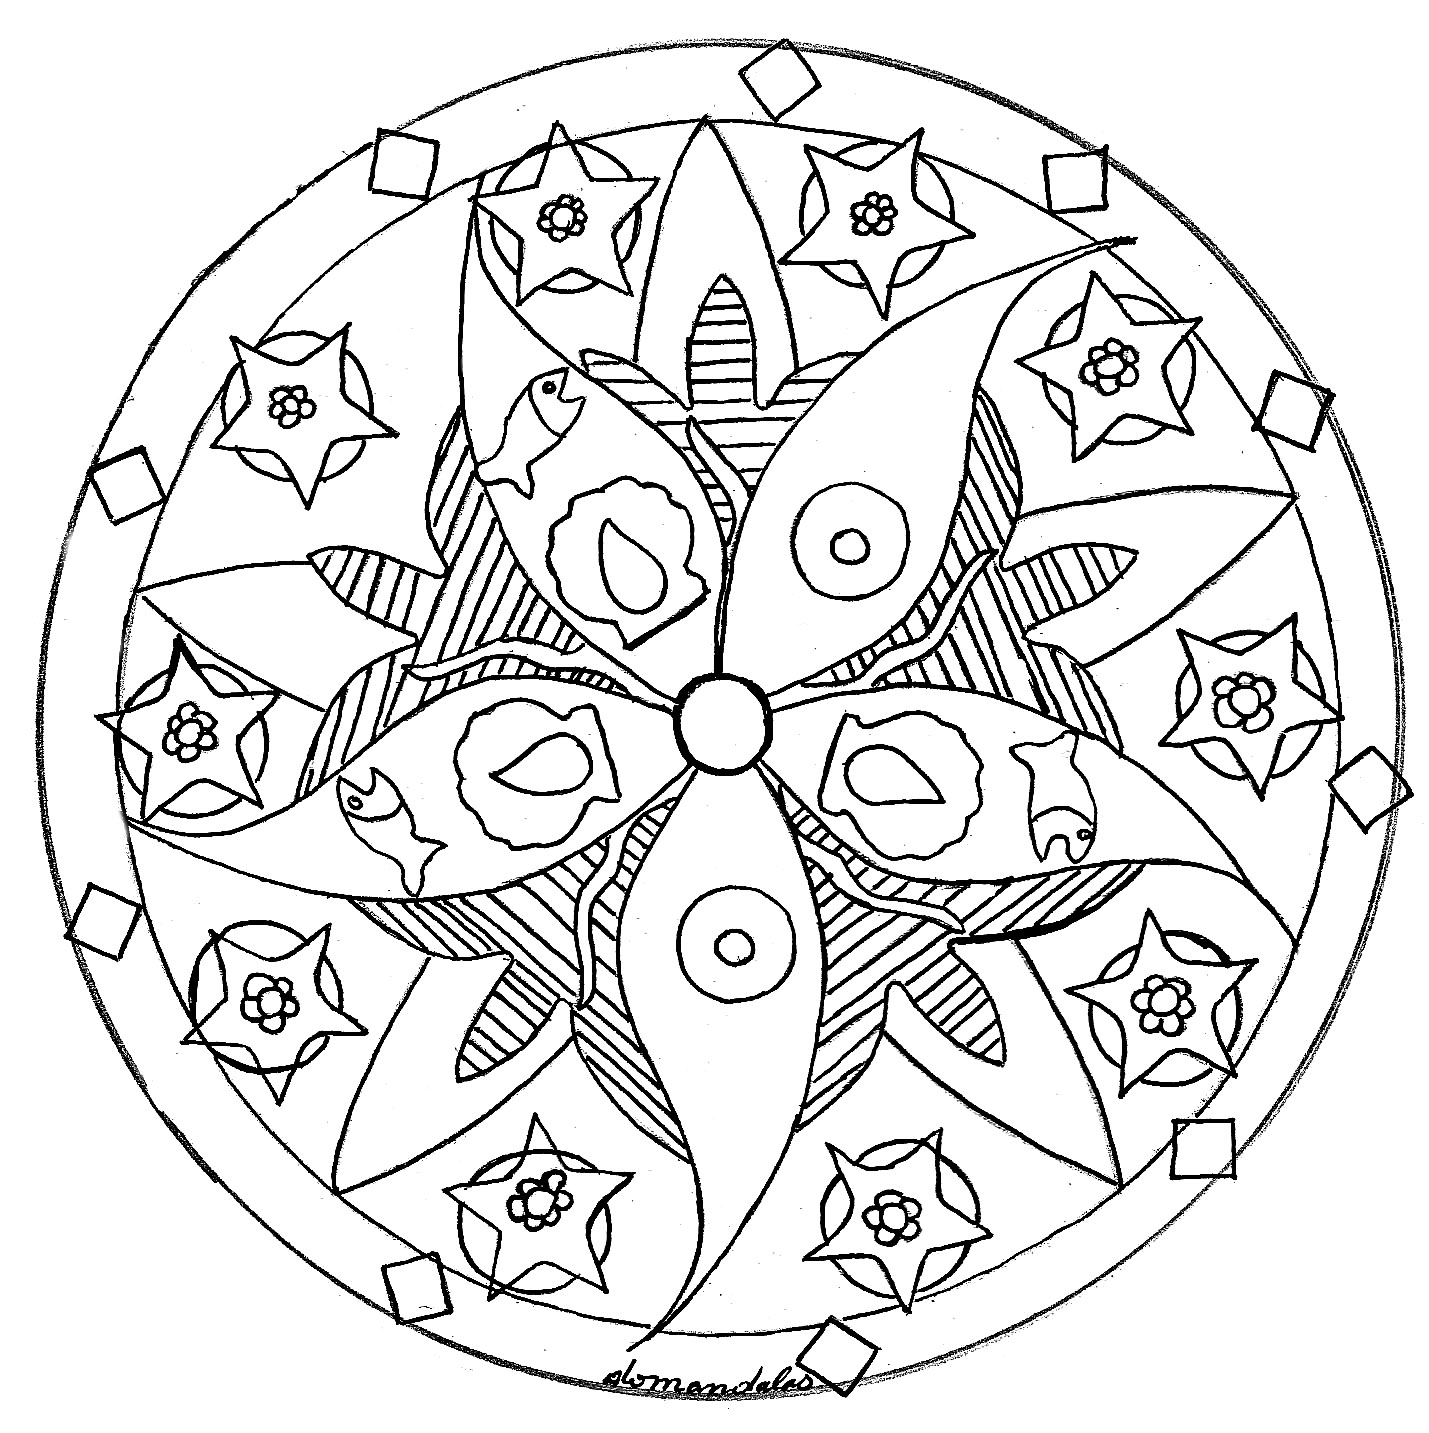 If you search for a Mandala not too complicated to complete, but still with a relative difficulty level, this one is good for you.